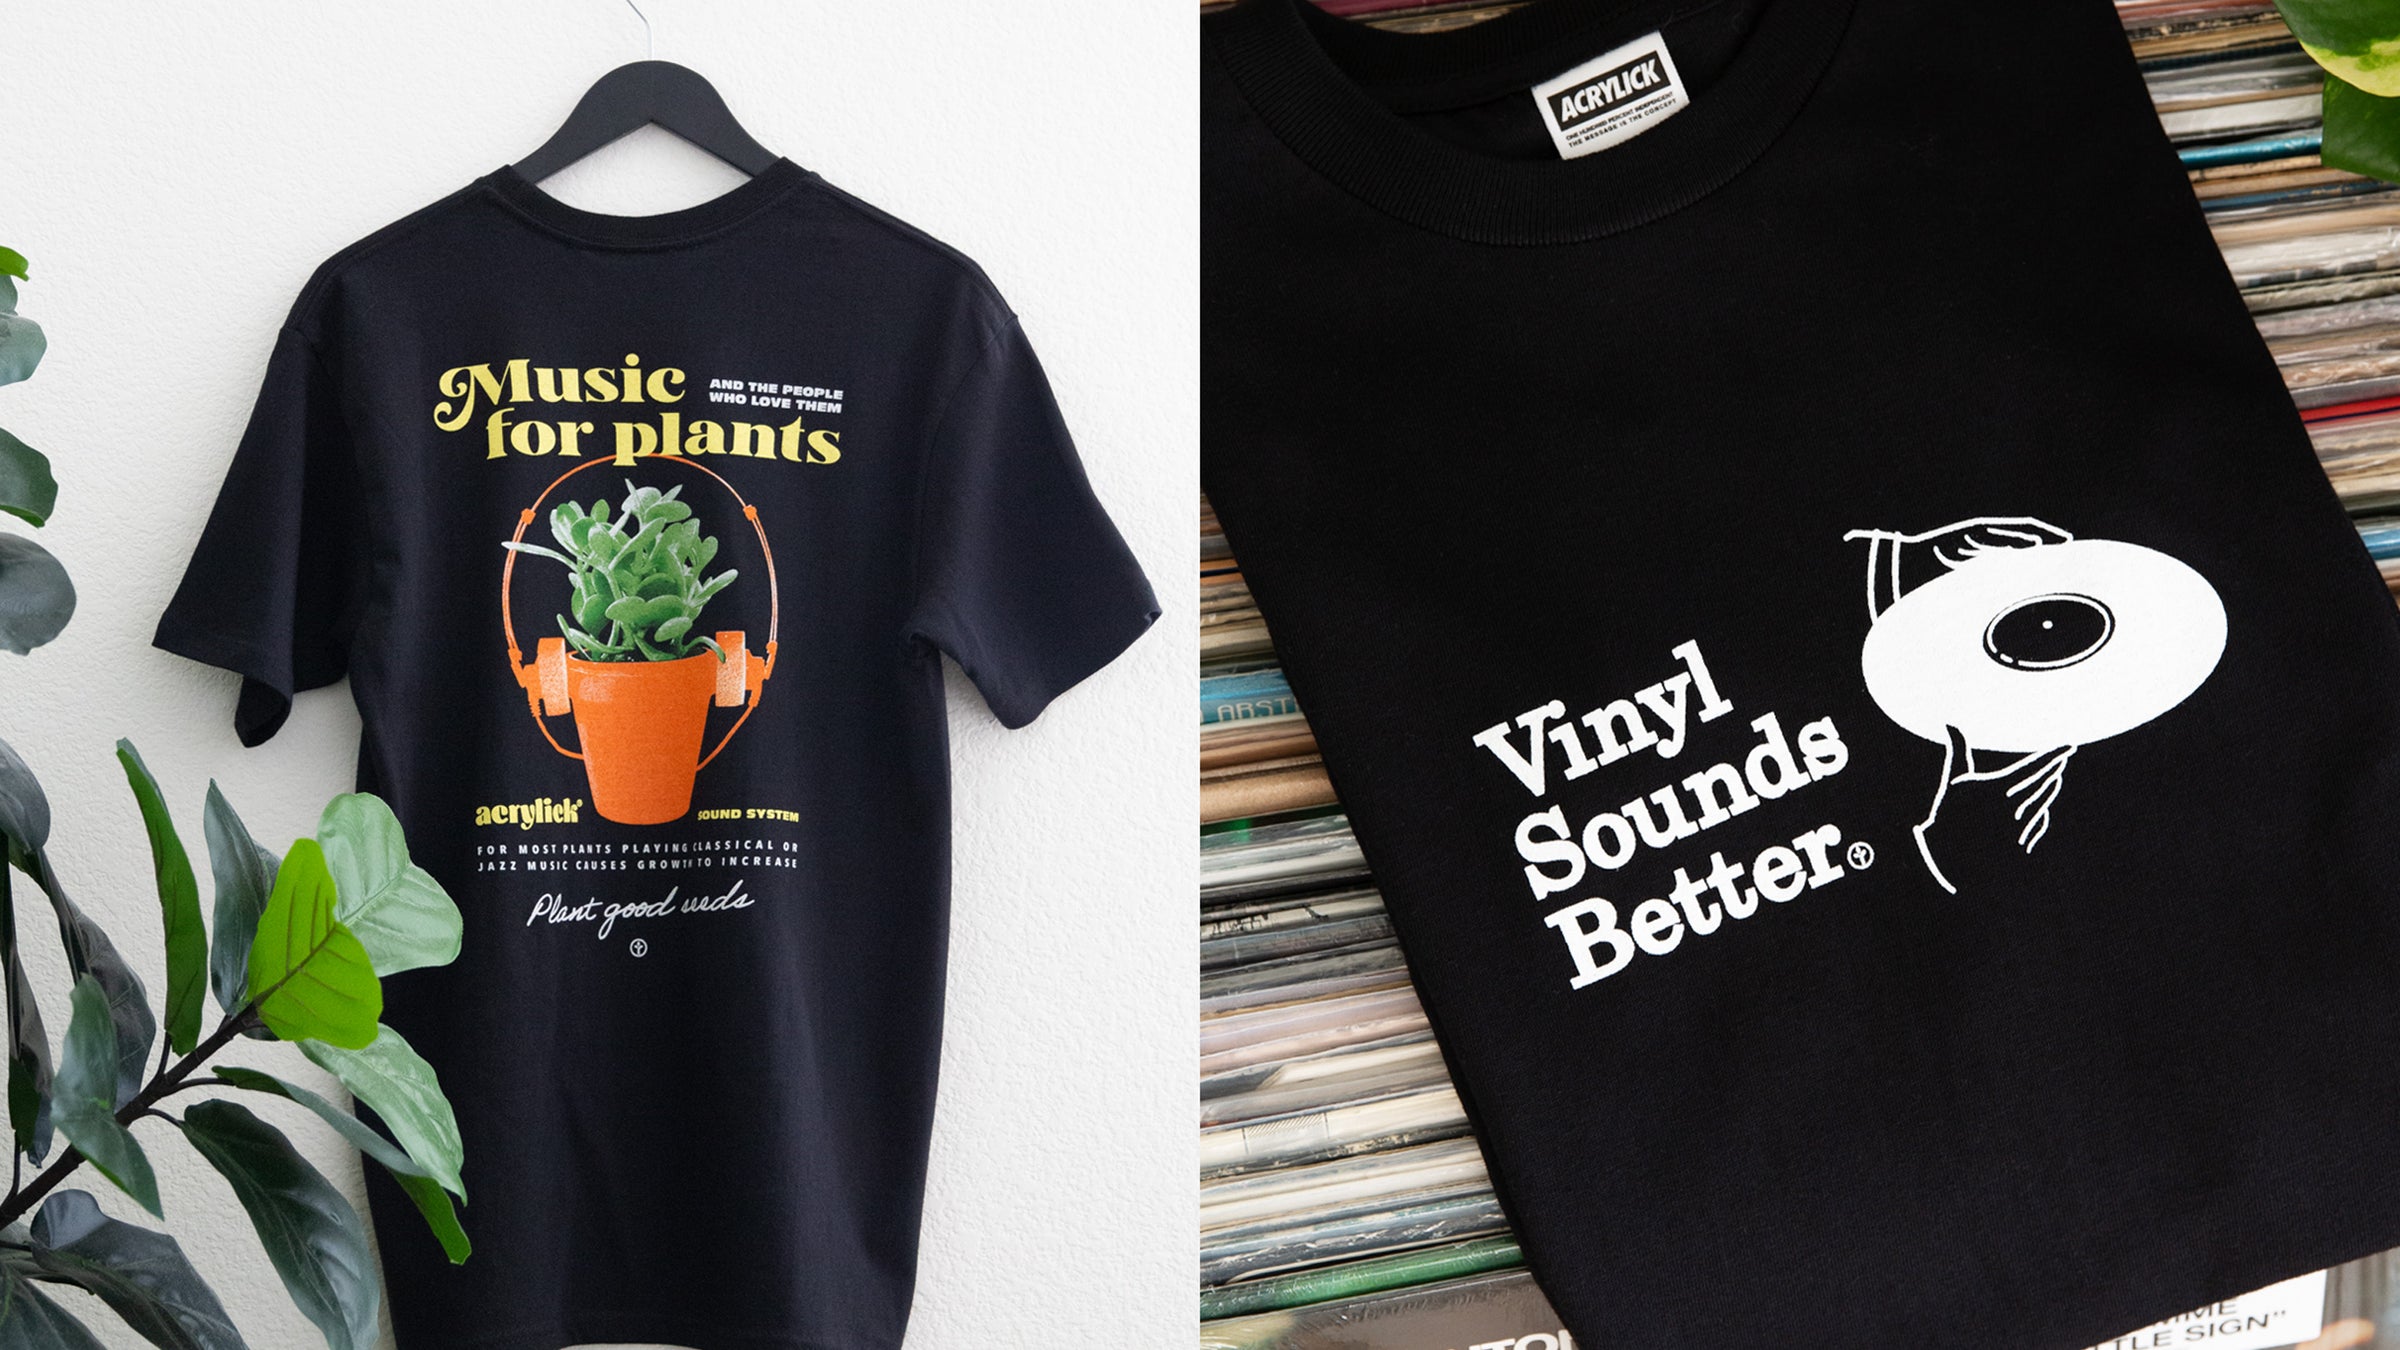 March Restocks - Music for Plants Tee and Vinyl Sounds Better Tee